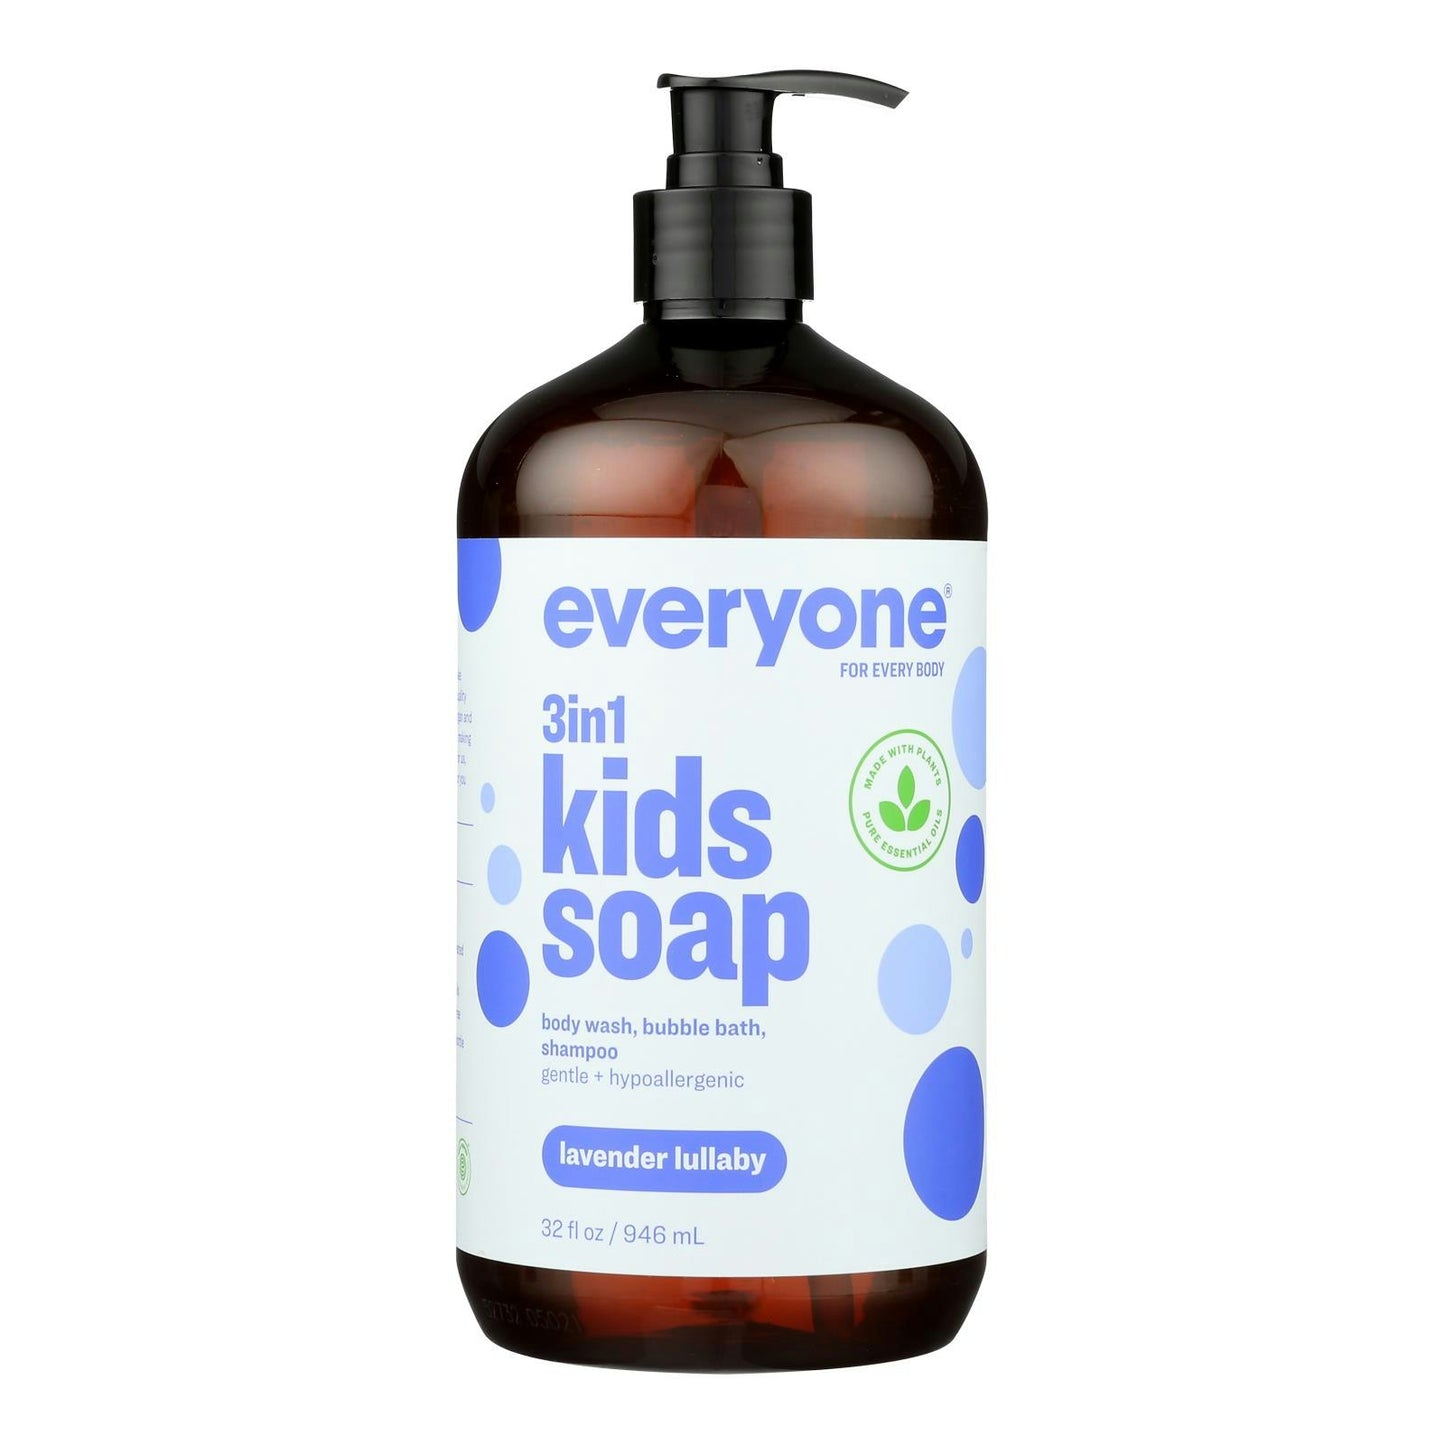 EO Products - Soap - Everyone for Kids - 3-in-1 - Lavender Lullaby Botanical - 32 oz